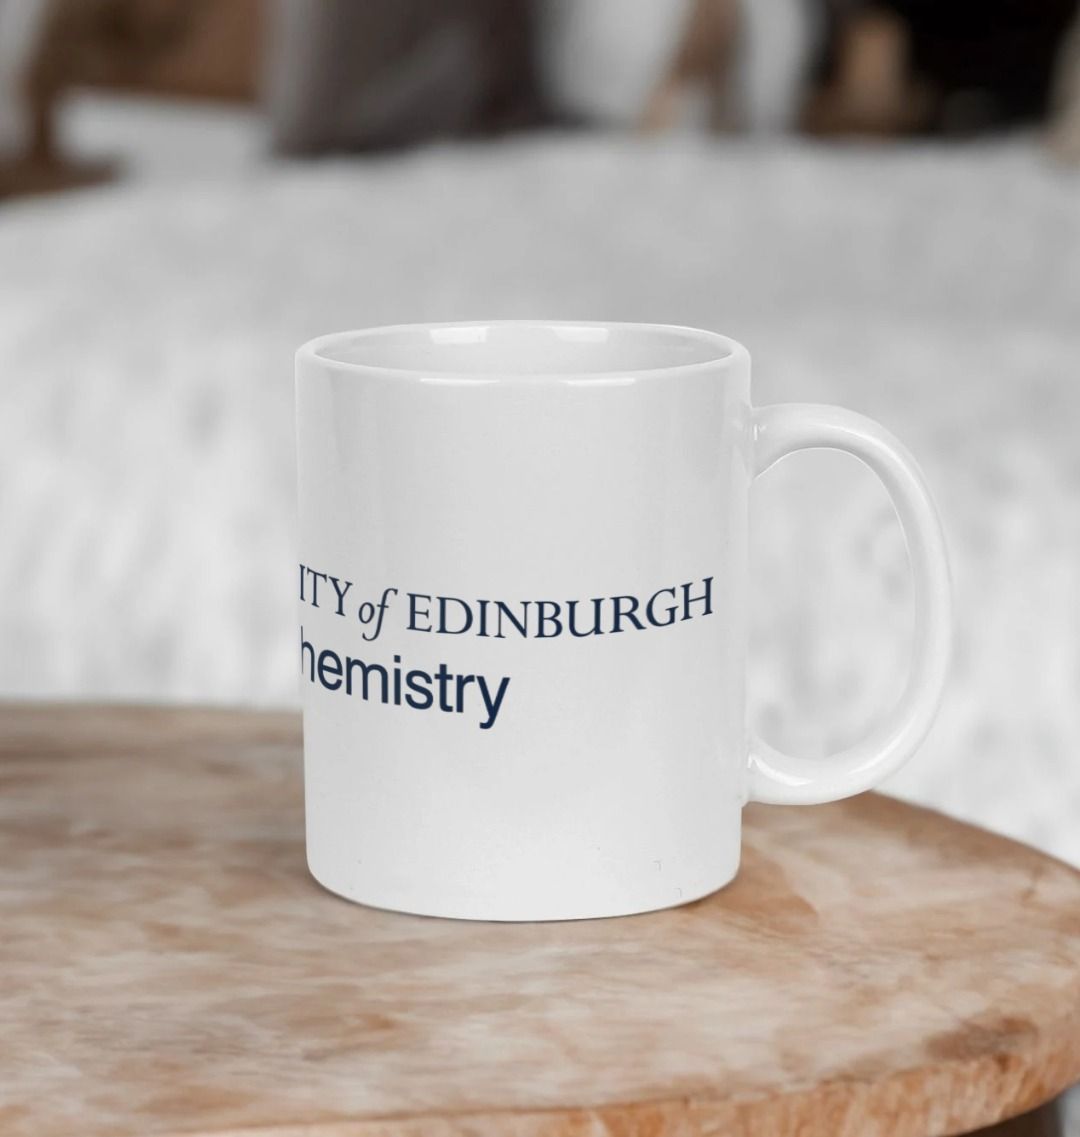 White School of Chemistry mug with multi-colour printed University crest and logo